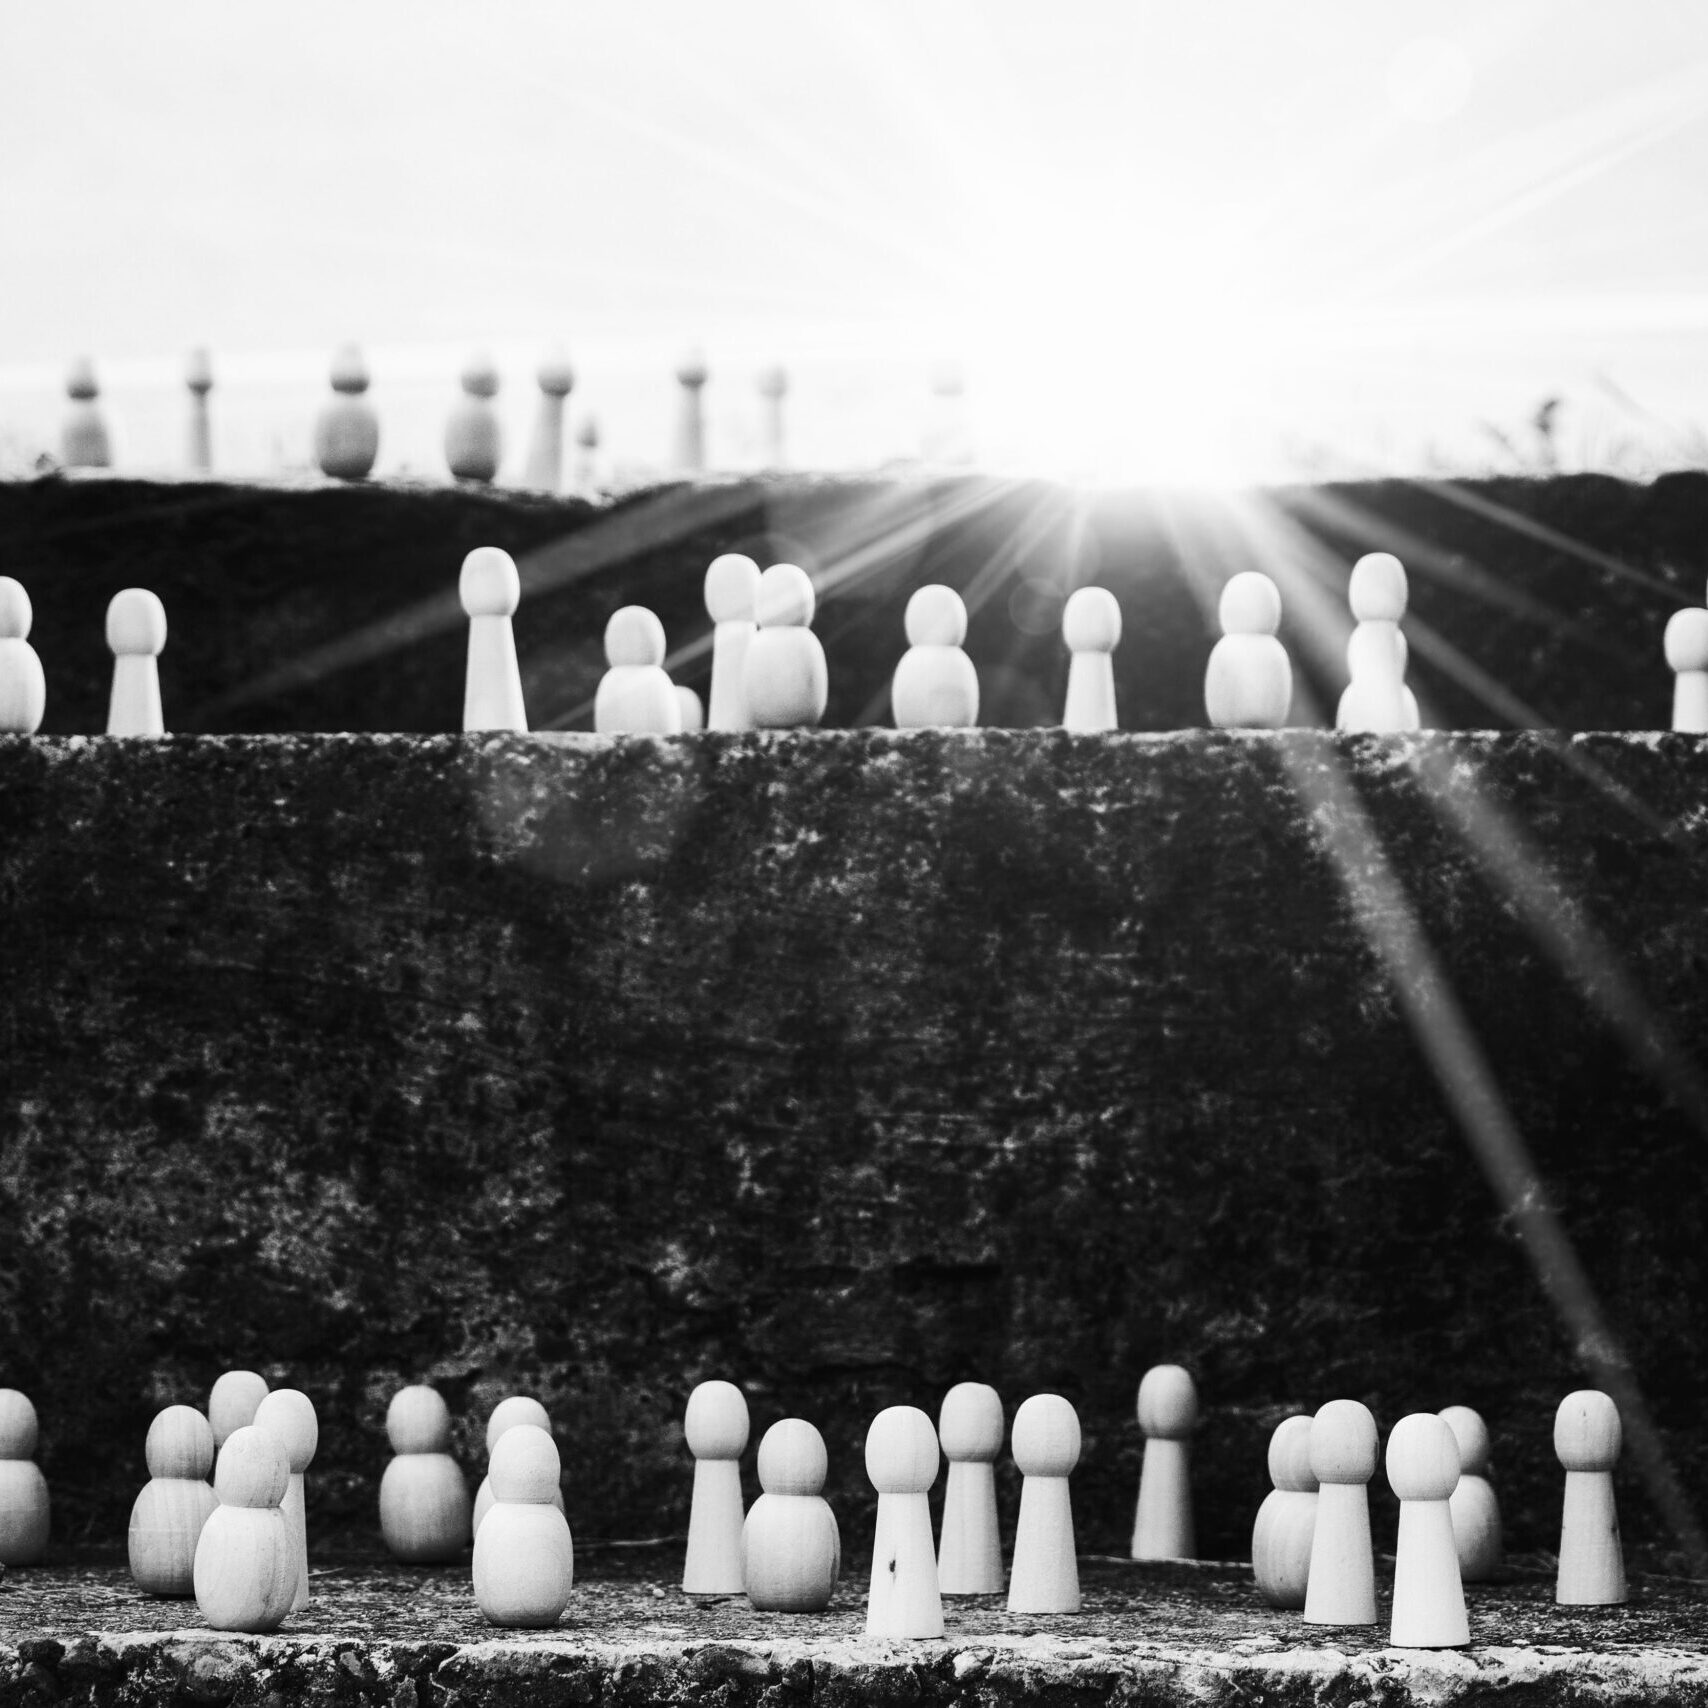 Black and white image of pions in different shapes and sizes standing on three different levels, with a bright sun in the background